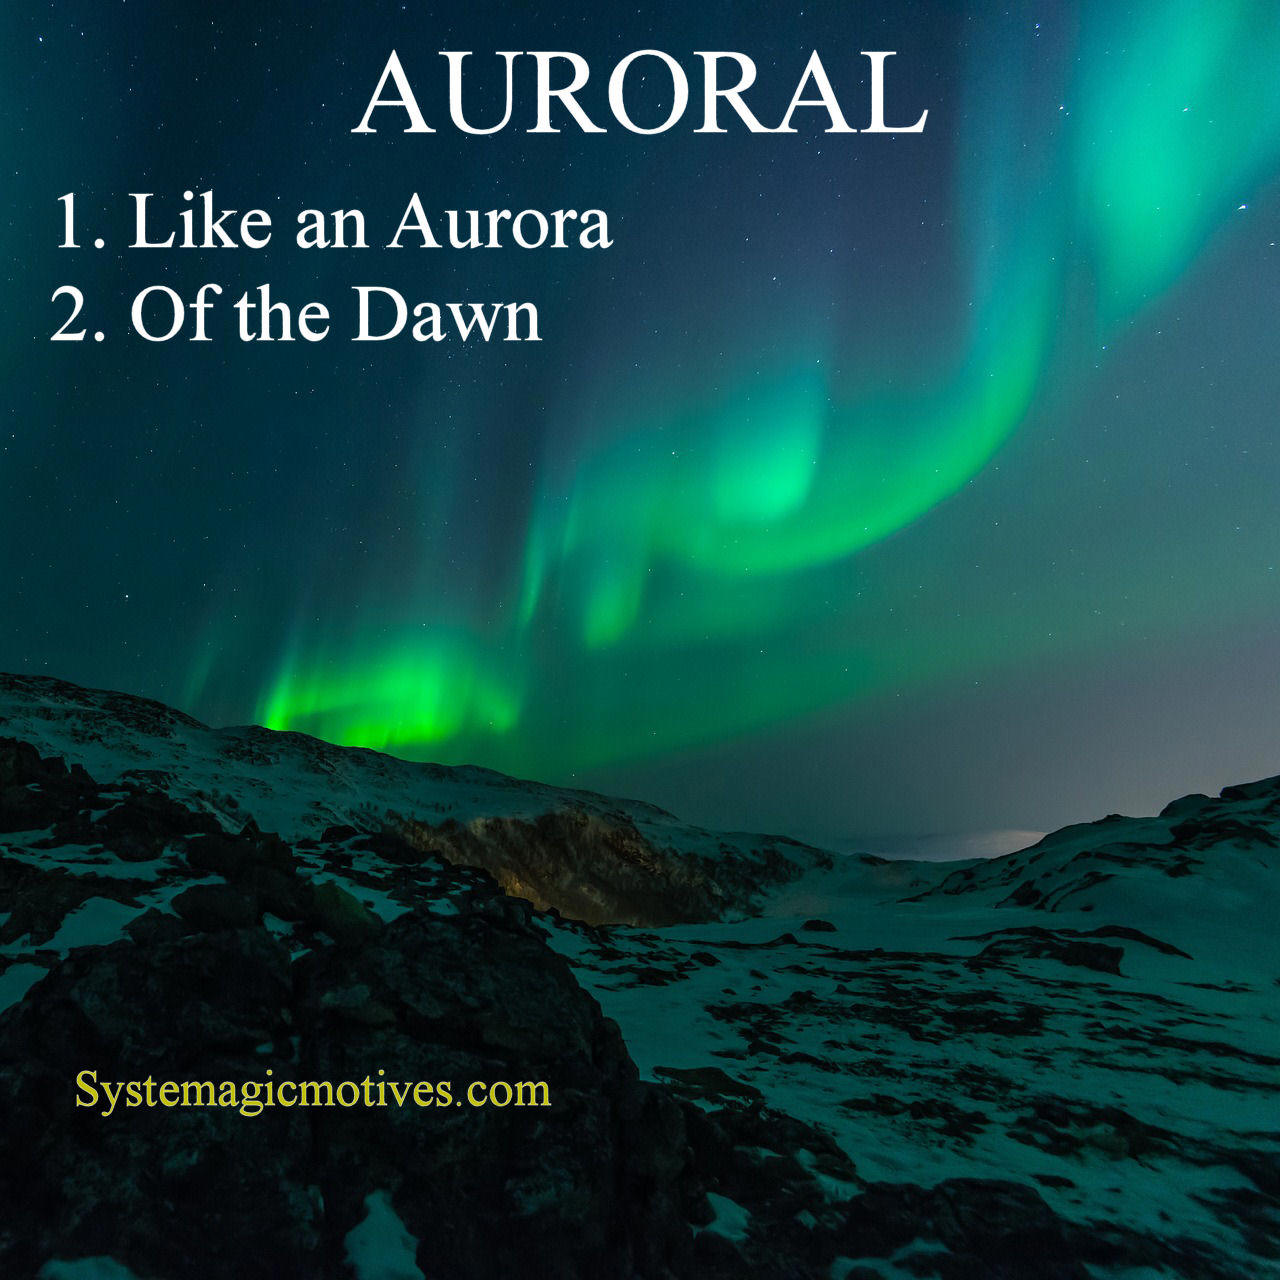 Graphic Definition of 'Auroral'